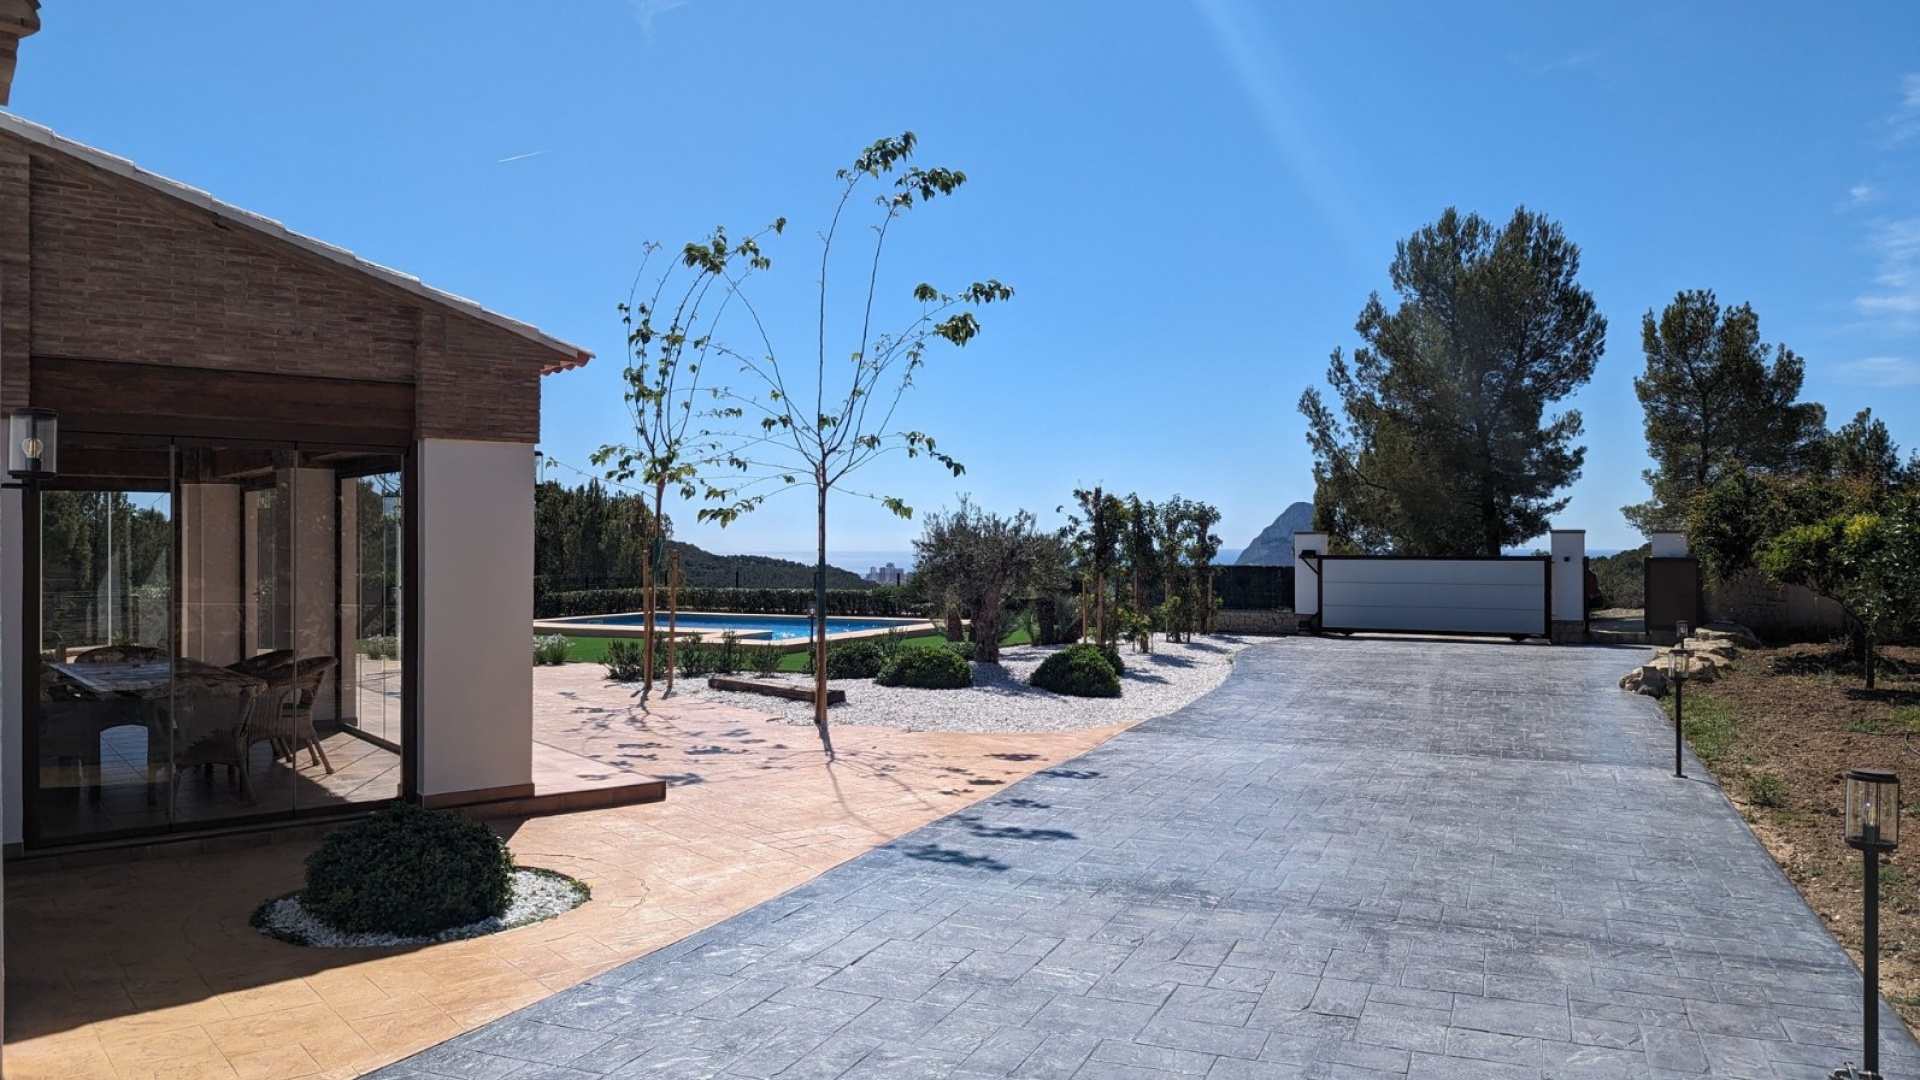 Resale - Country Property - Benissa